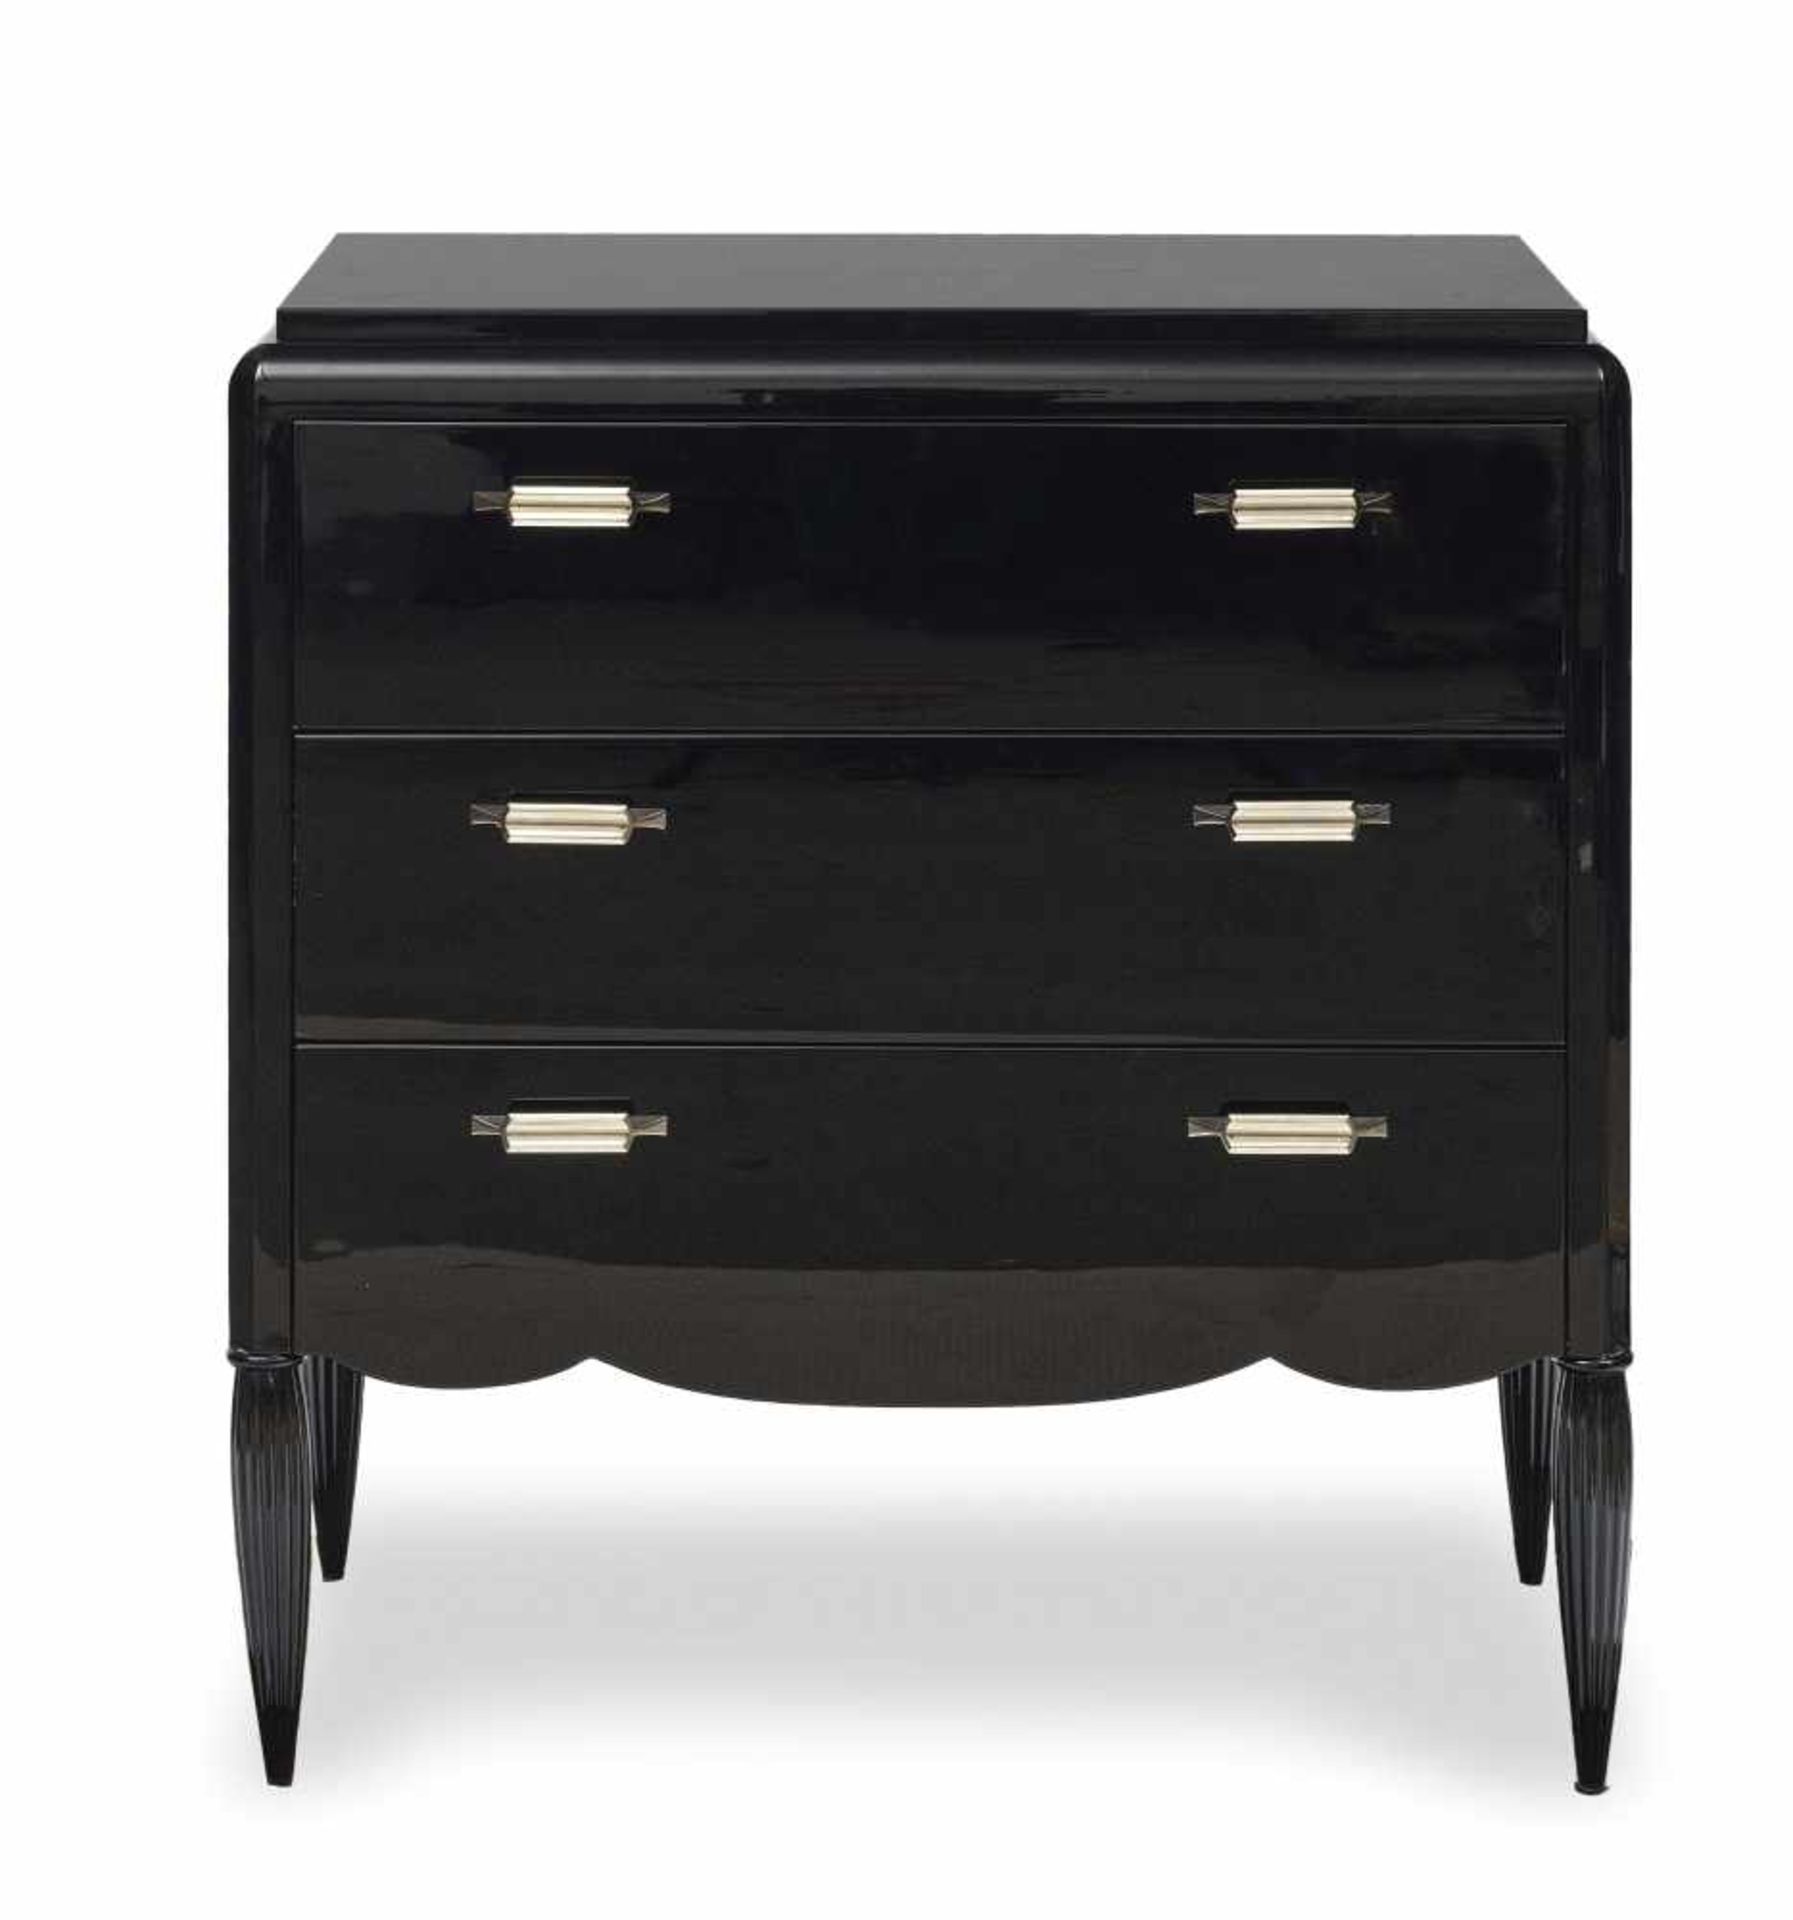 An Art Deco dresserFrance, circa 1930 Wood, painted in black. Chrome-plated metal handles. Restored.